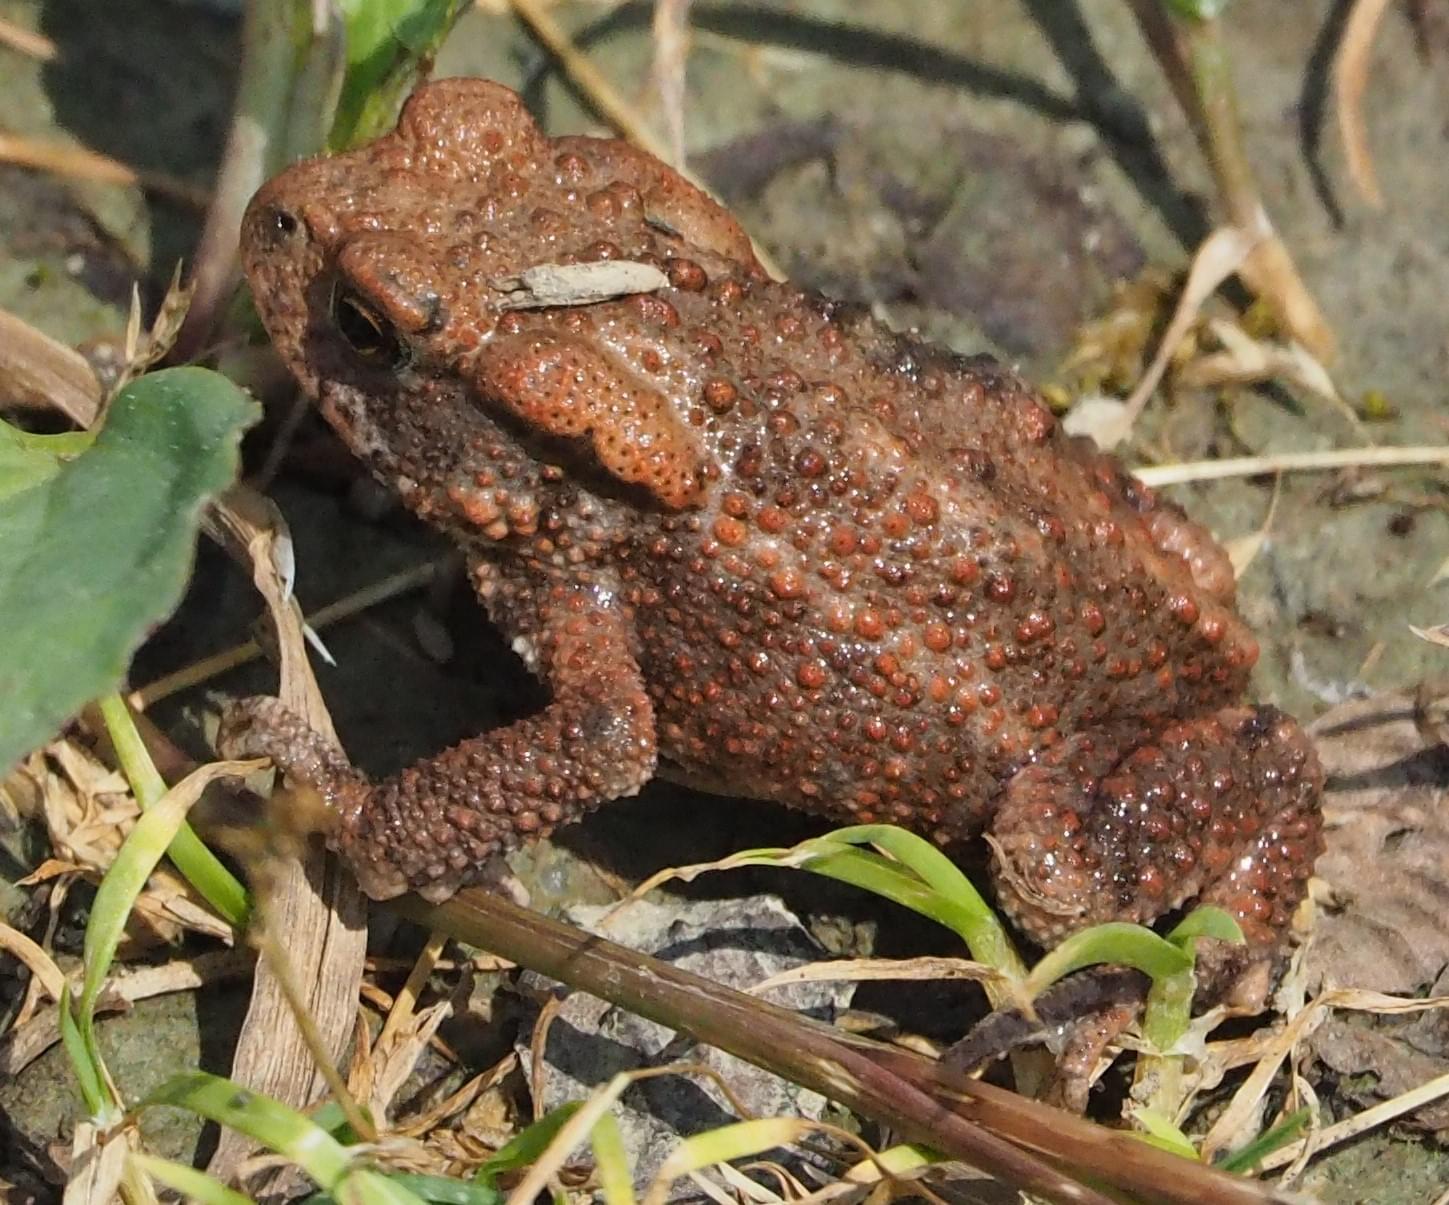 Small toad